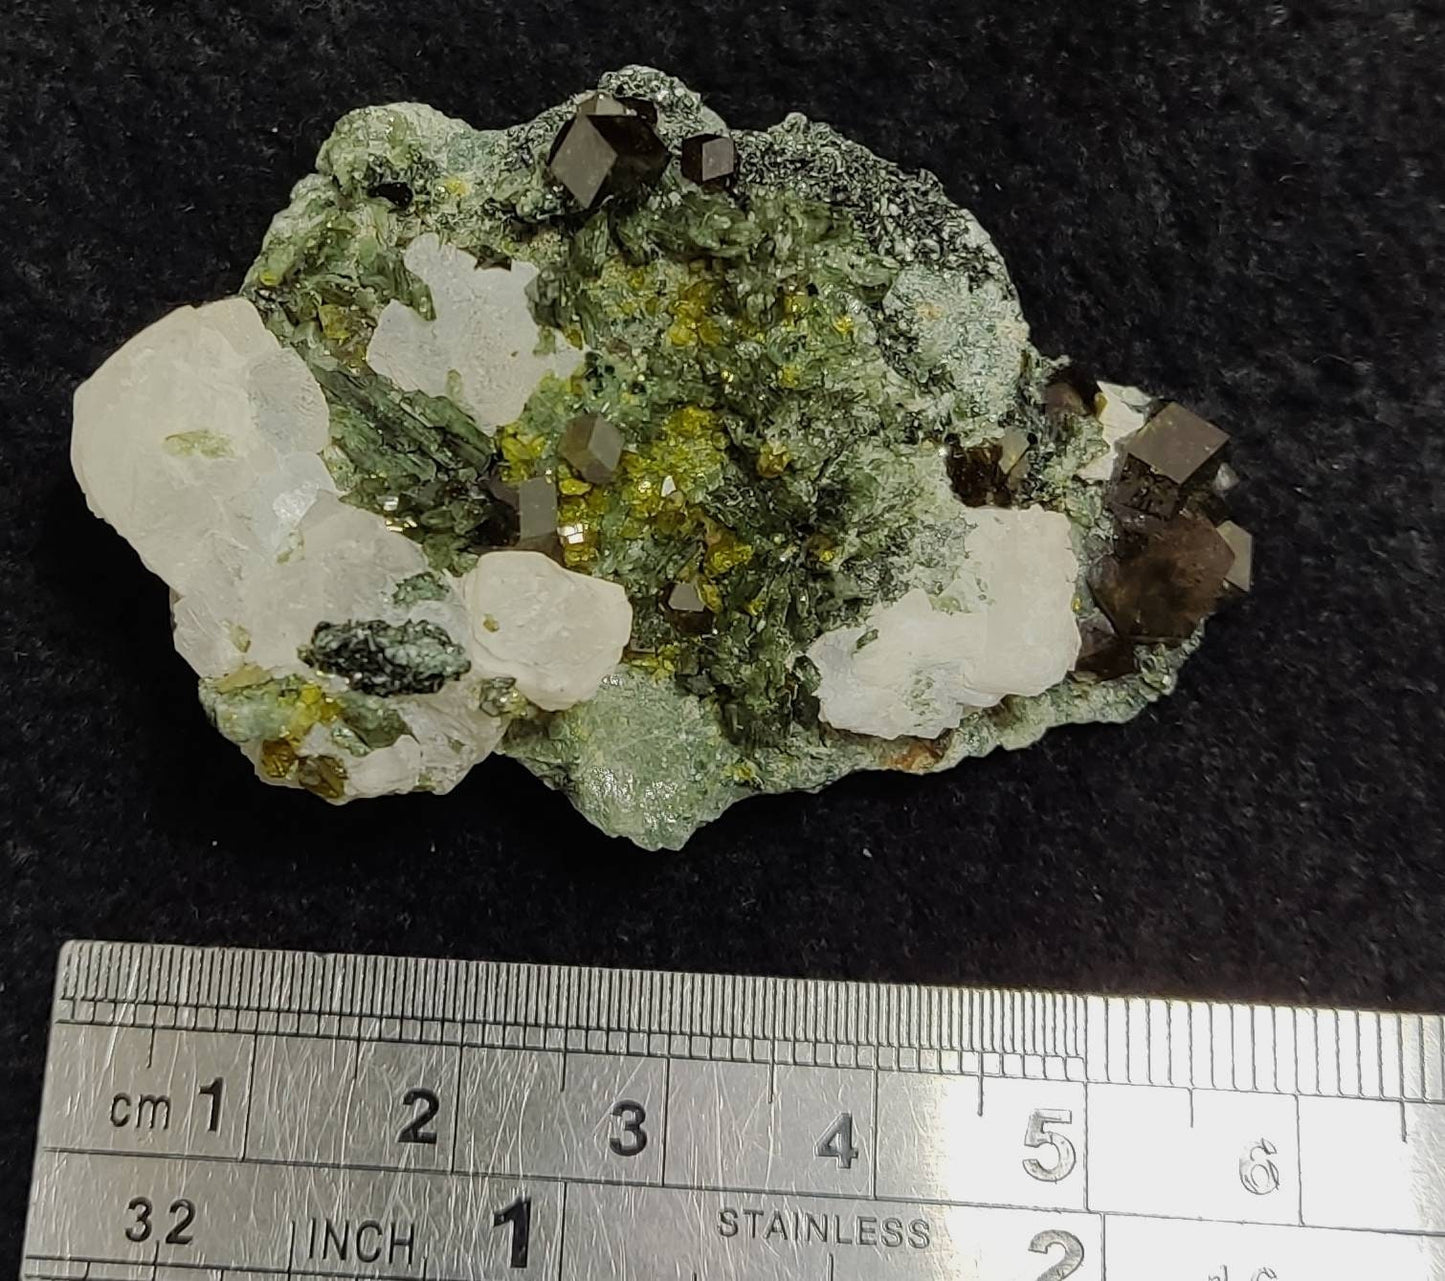 Andradite garnet crystals on matrix with epidote, diopside and calcite aesthetic specimen 51 grams